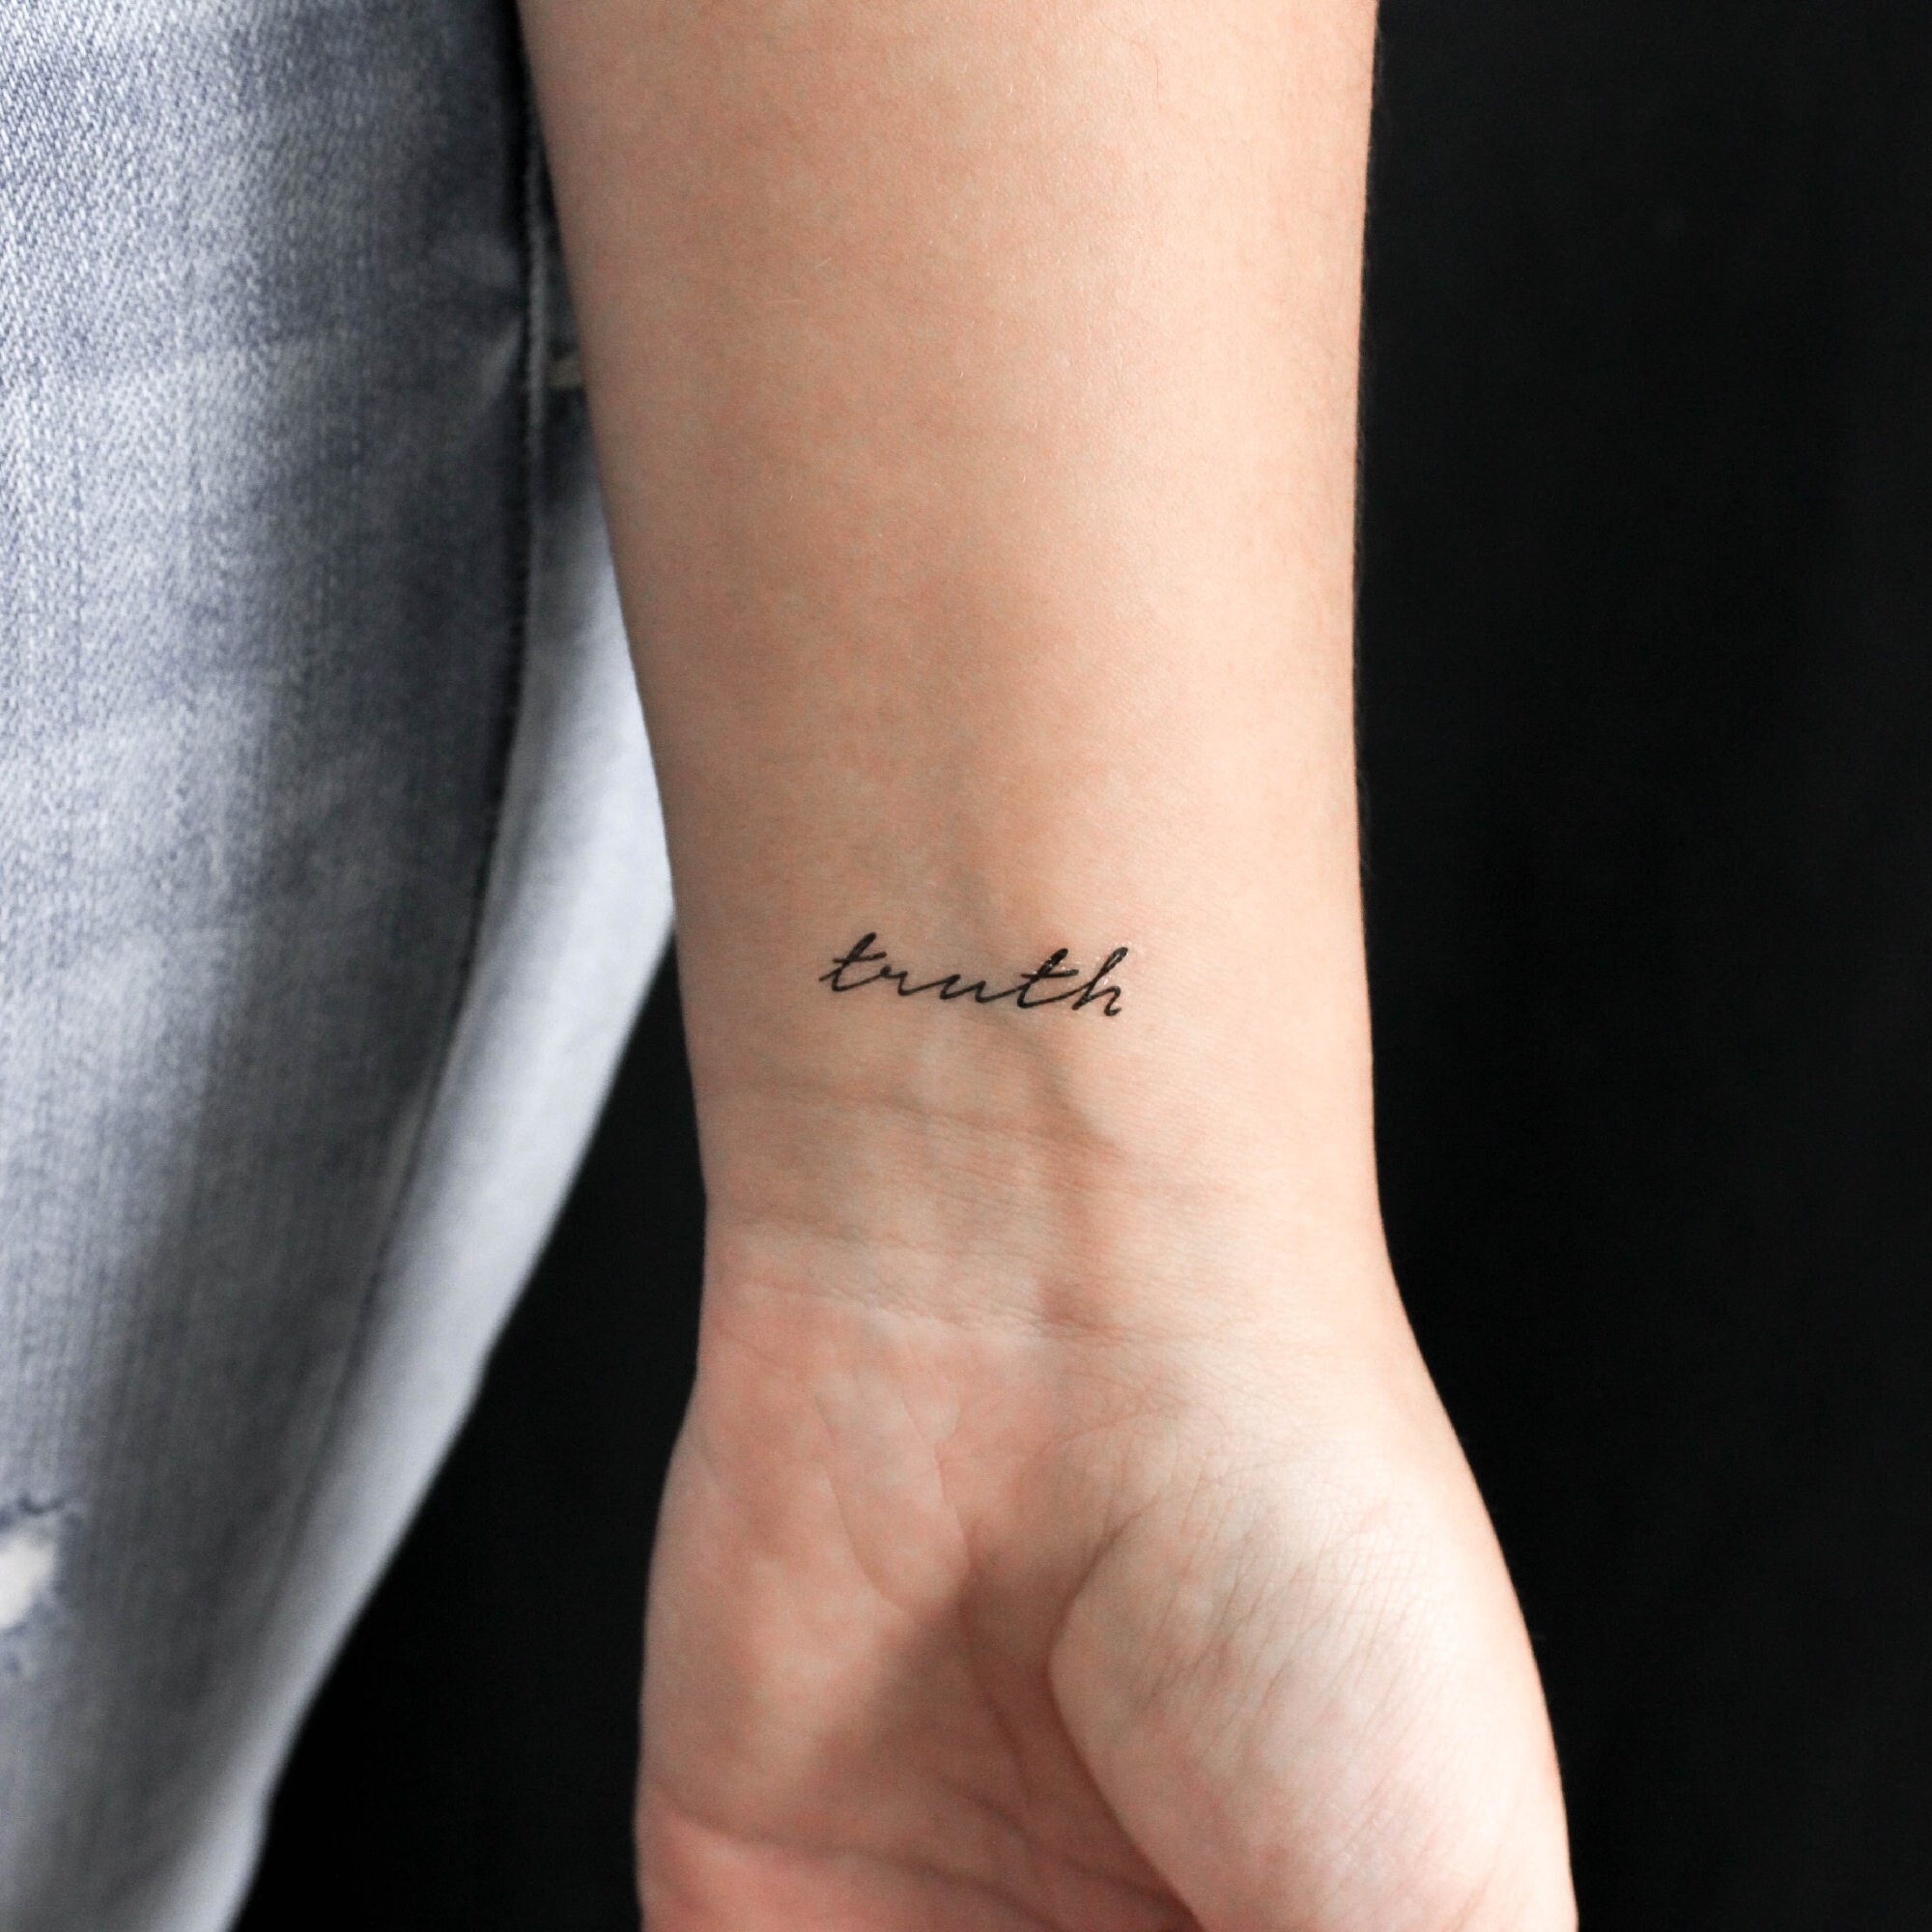 Lettering tattoo that says 